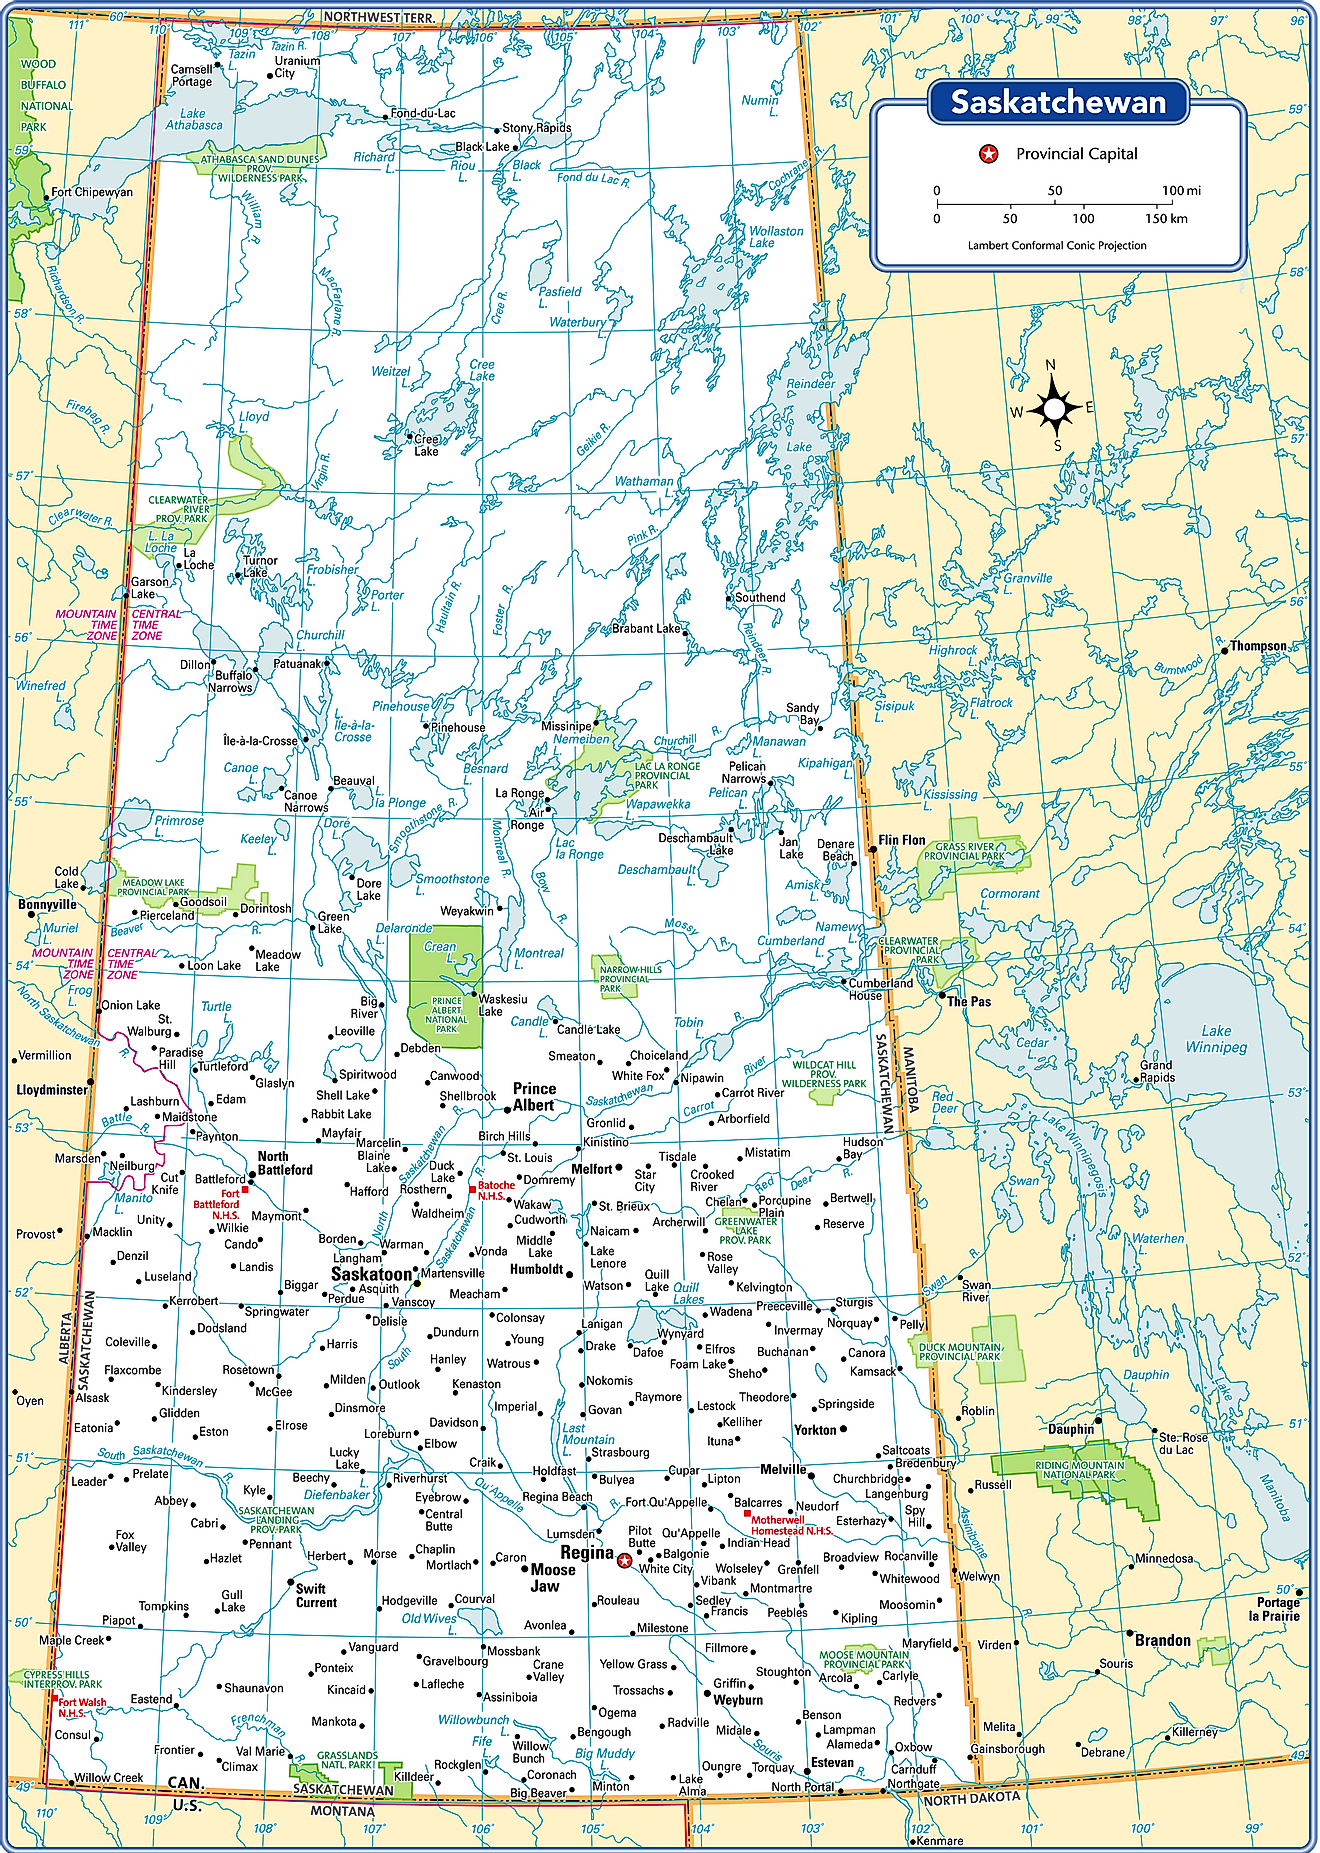 Administrative Map of Saskatchewan showing its various cities/towns including its capital city - Regina